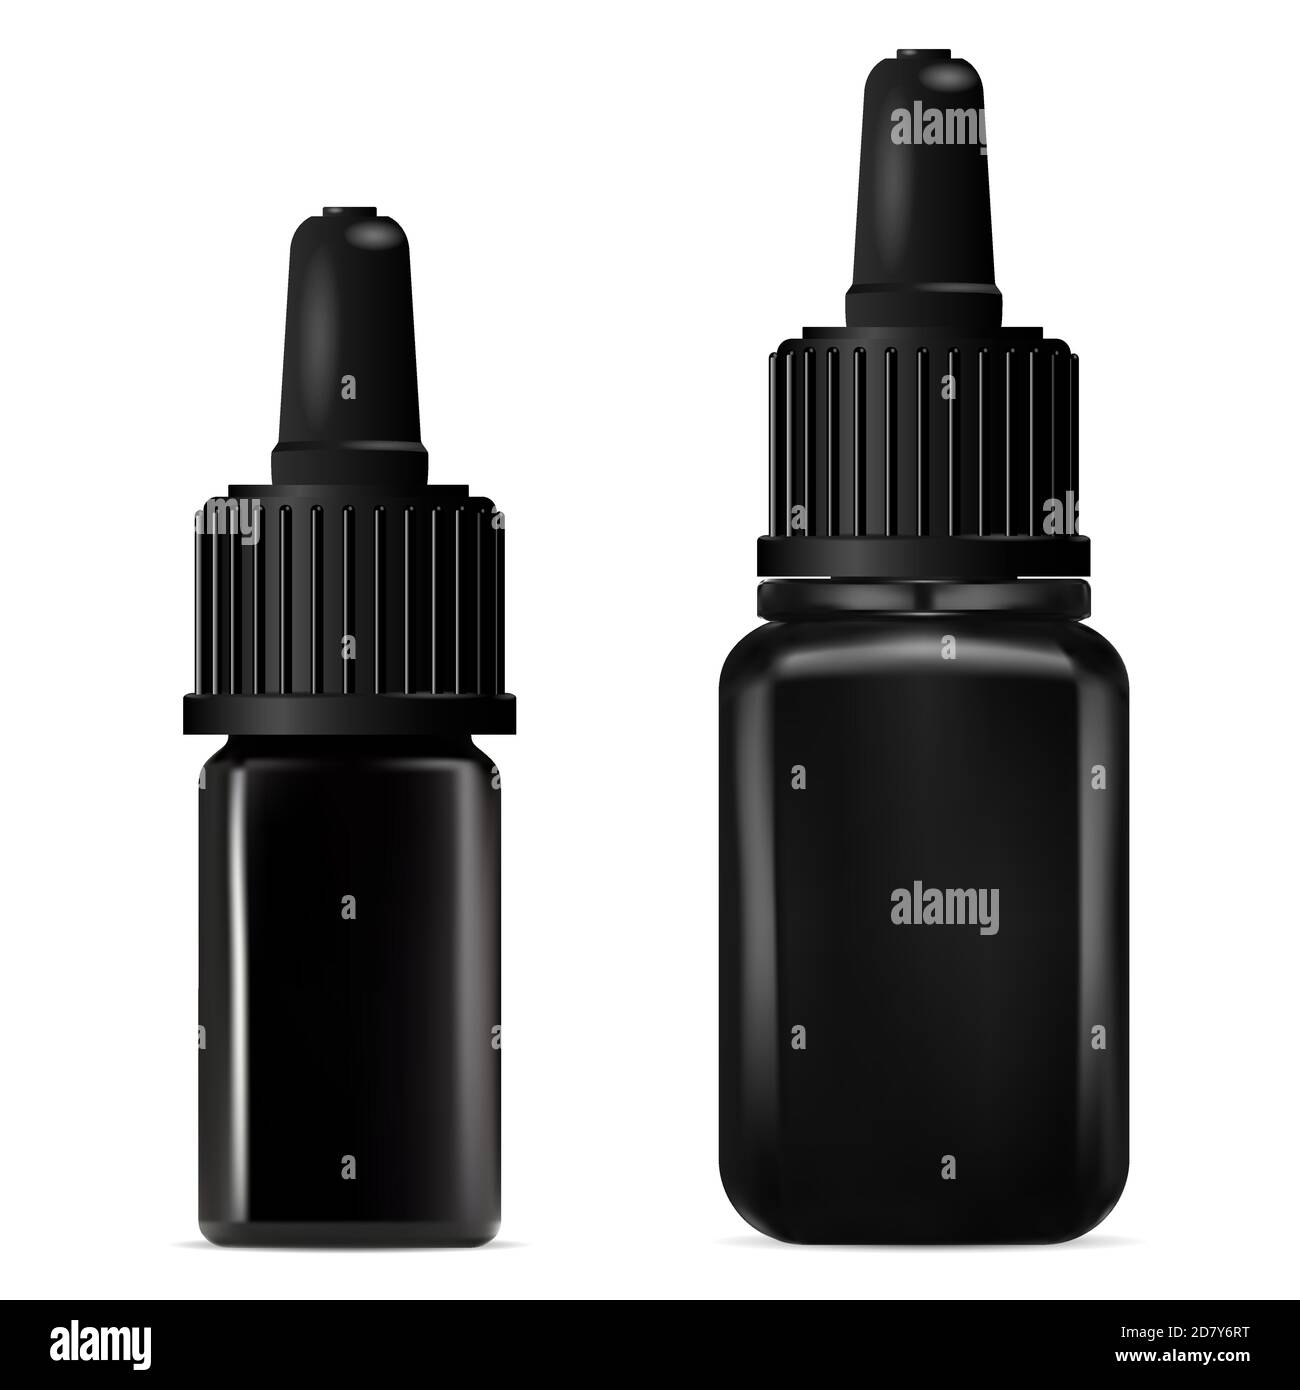 Download Black Glass Dropper Bottle Mockup Cosmetic Serum Vial With Drop Cap Essential Oil Container With Eyedropper Realistic Luxury Illustration Pharmacy Stock Vector Image Art Alamy